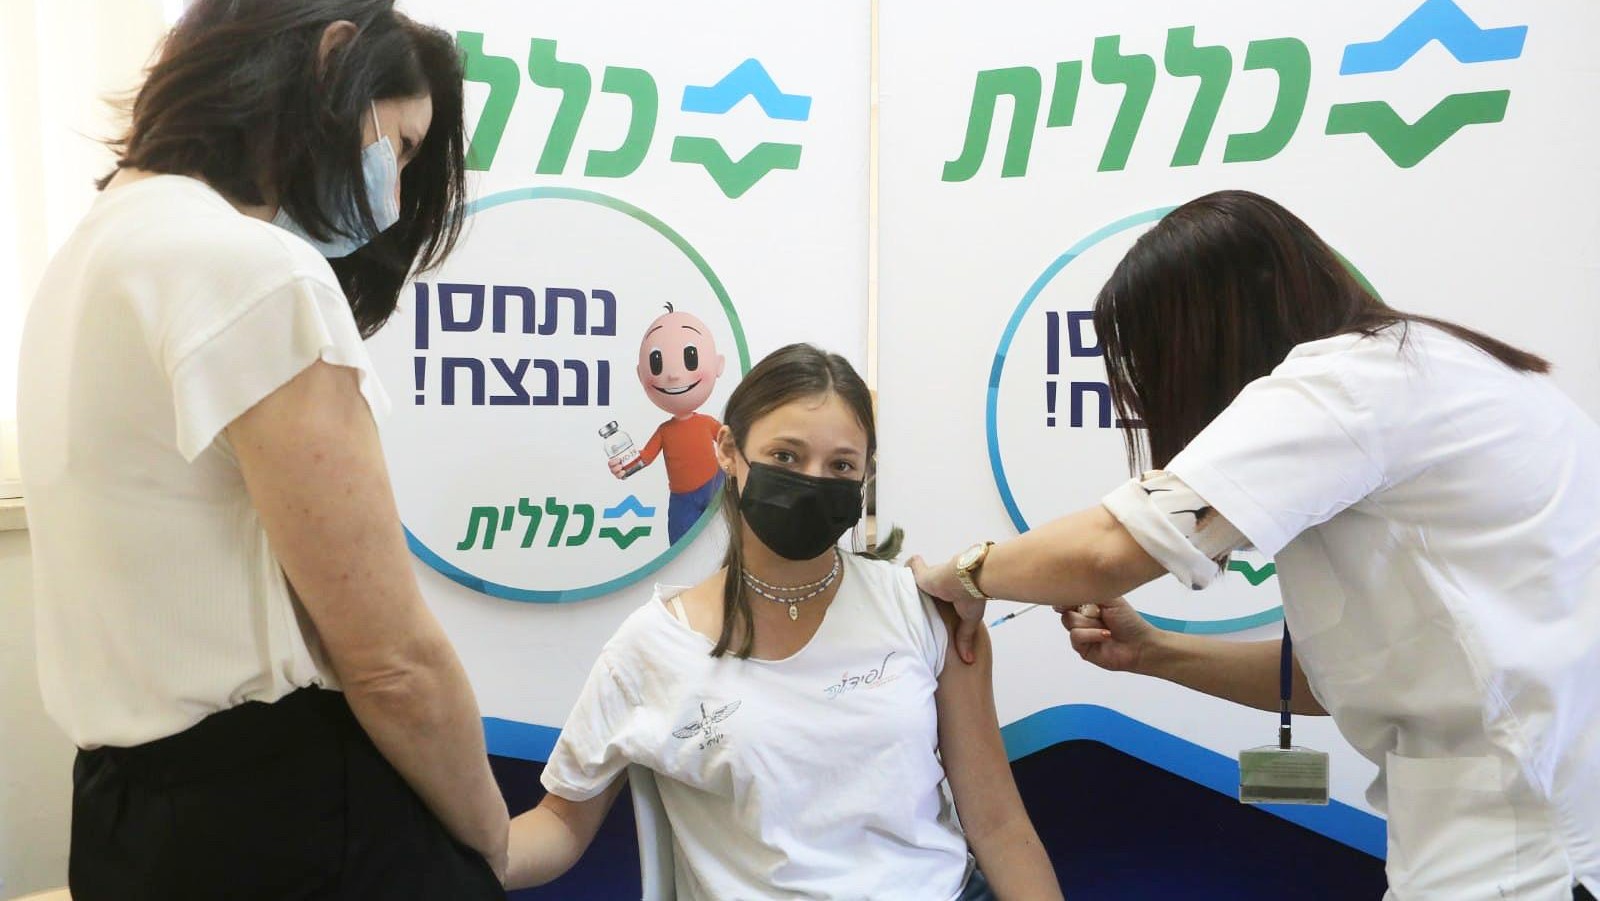 Prime Minister Naftali Bennett's daughter Michal Bennett, 14, accompanied by her mother, Gilat, receiving her coronavirus vaccine on June 29, 2021, at a Clalit Health Services clinic in Ra'anana. Photo by Nimrod Glickman, Clalit Health Services (Sharon-Samaria District) Spokesperson's Office